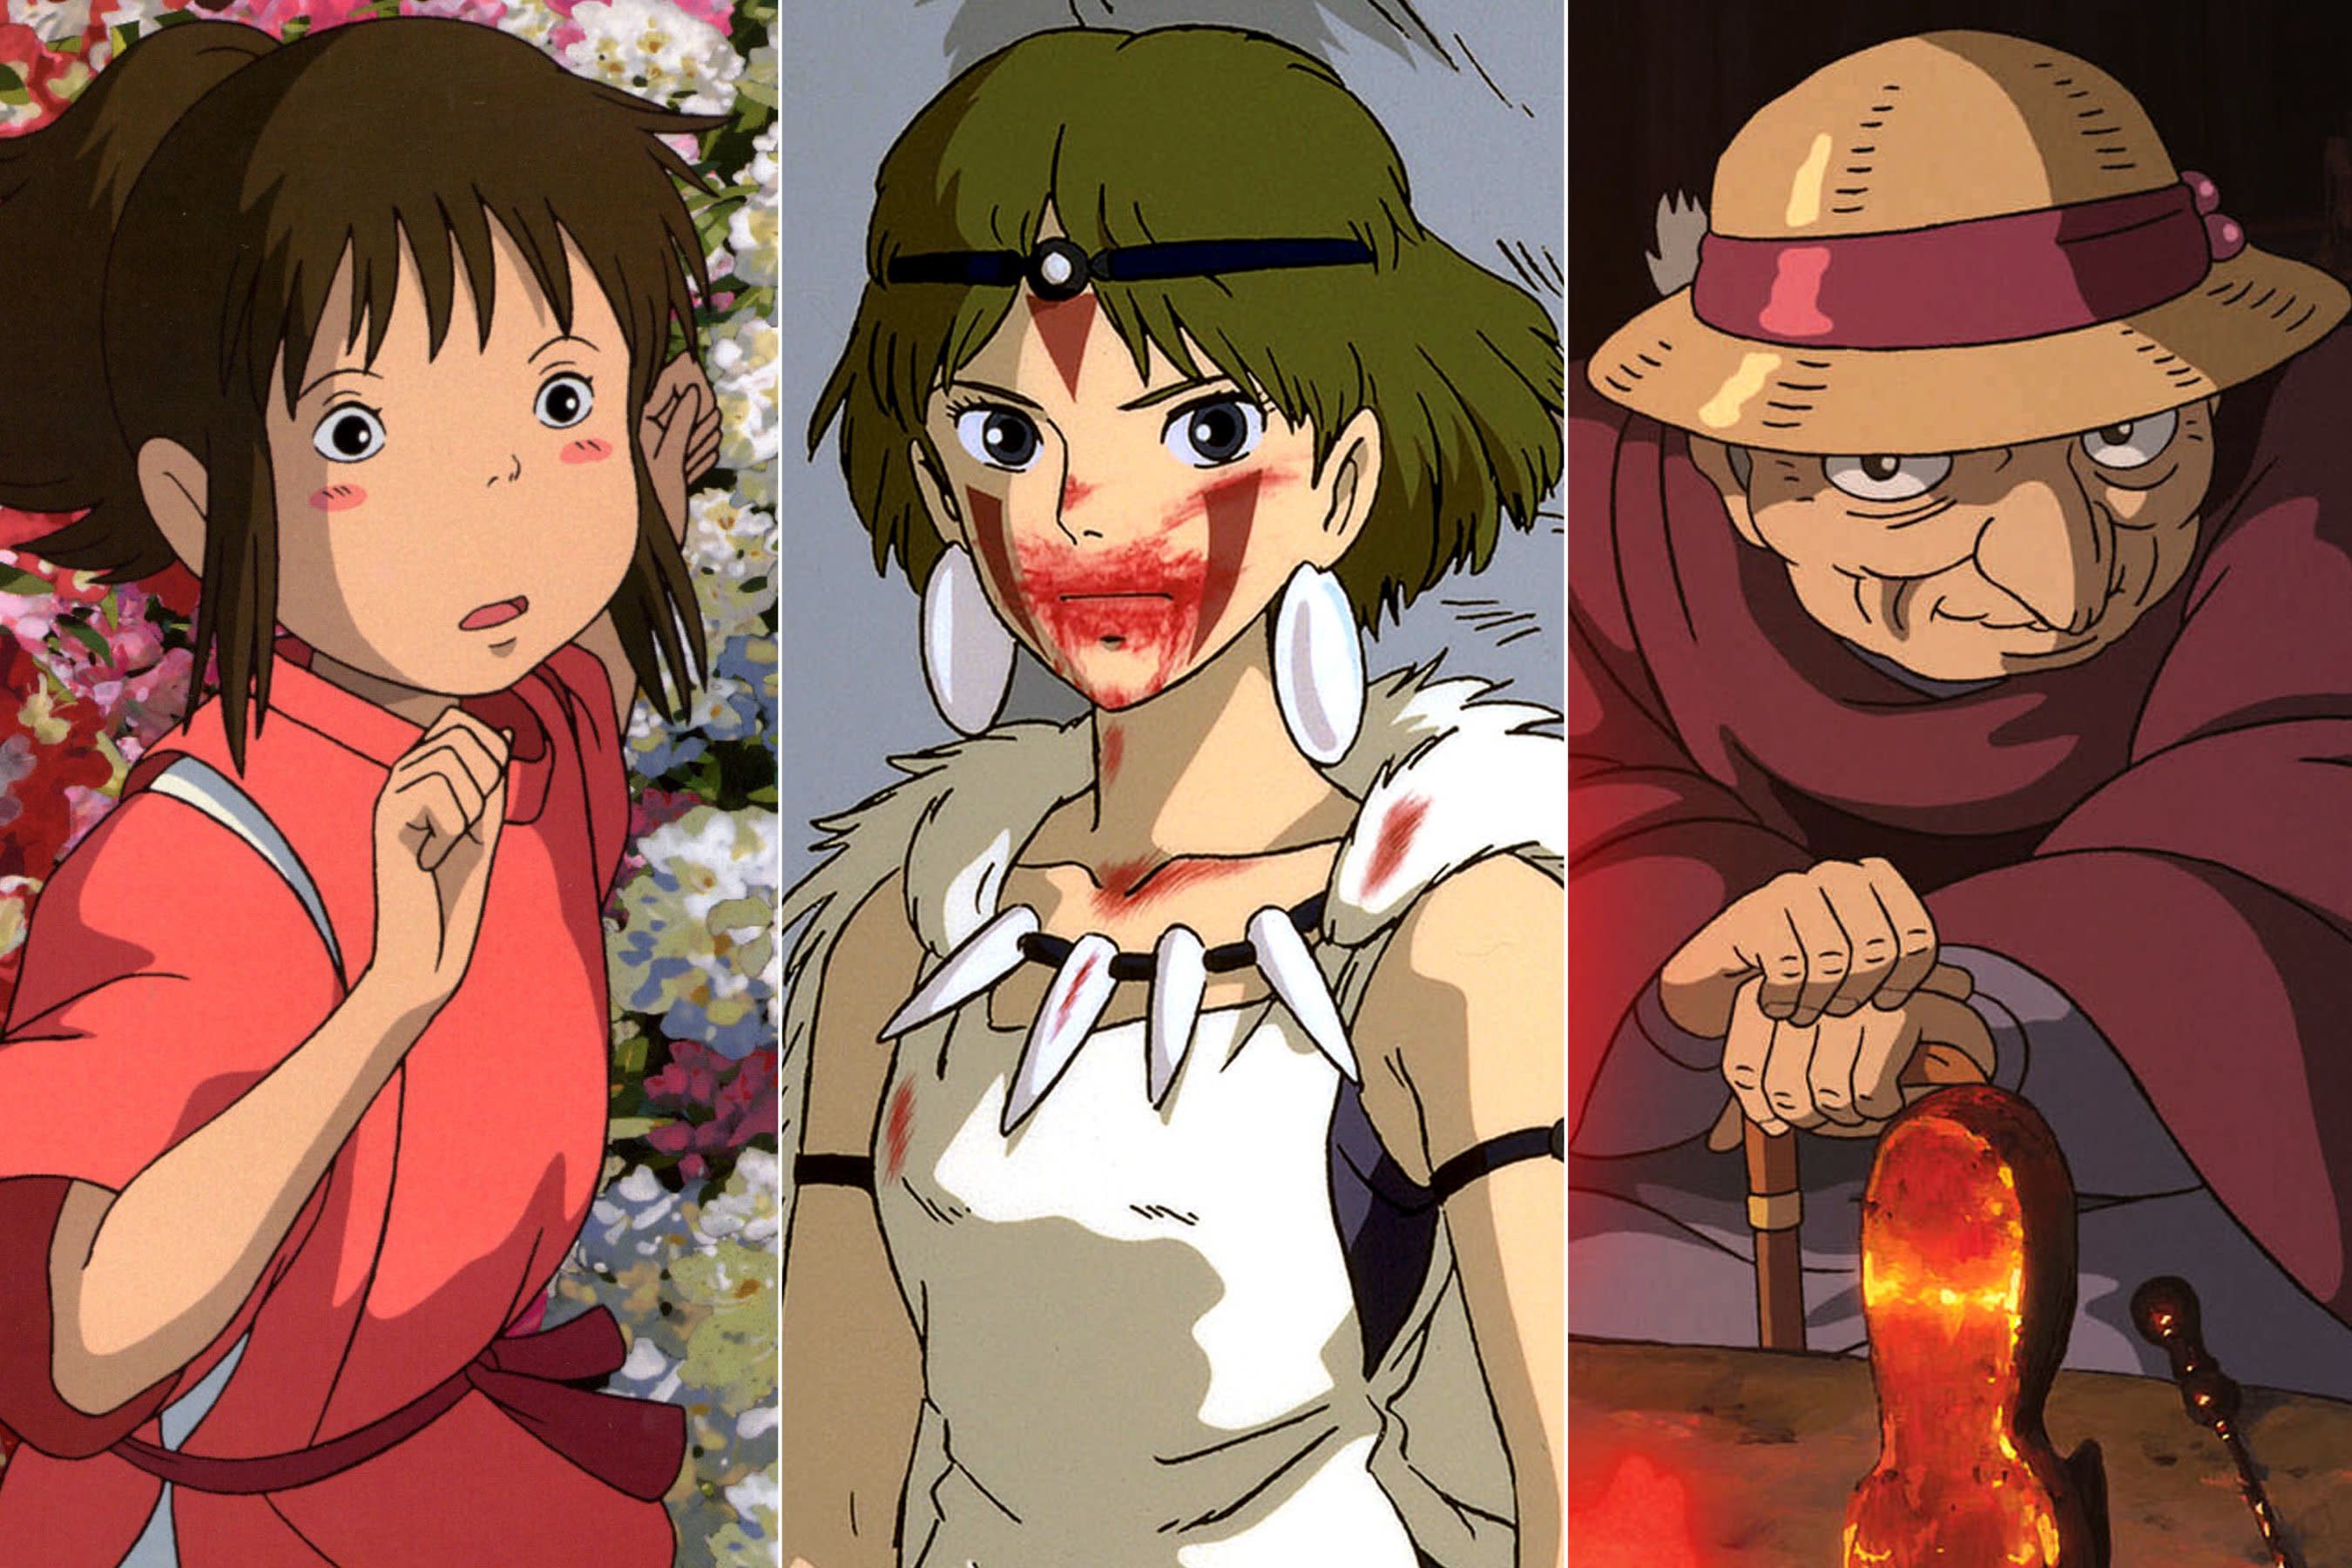 All of Studio Ghibli’s animated films, including Spirited Away, are